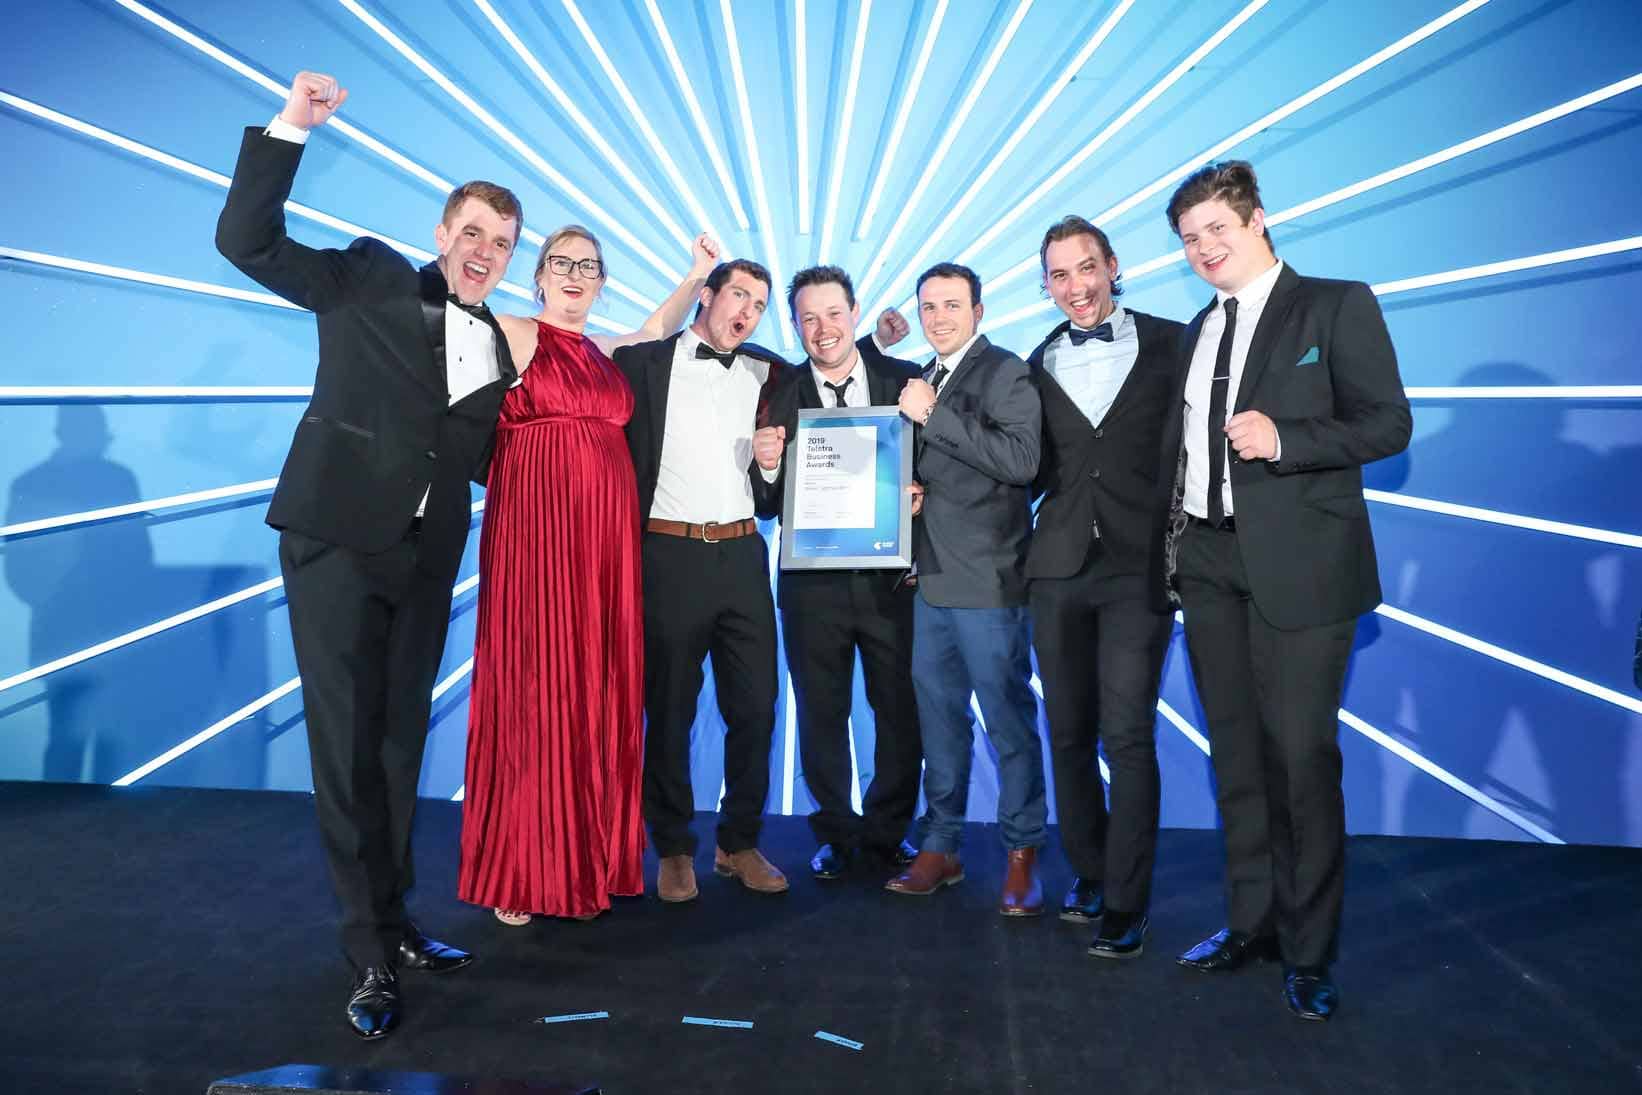 Water Tight Canberra wins the 2019 Telstra business award